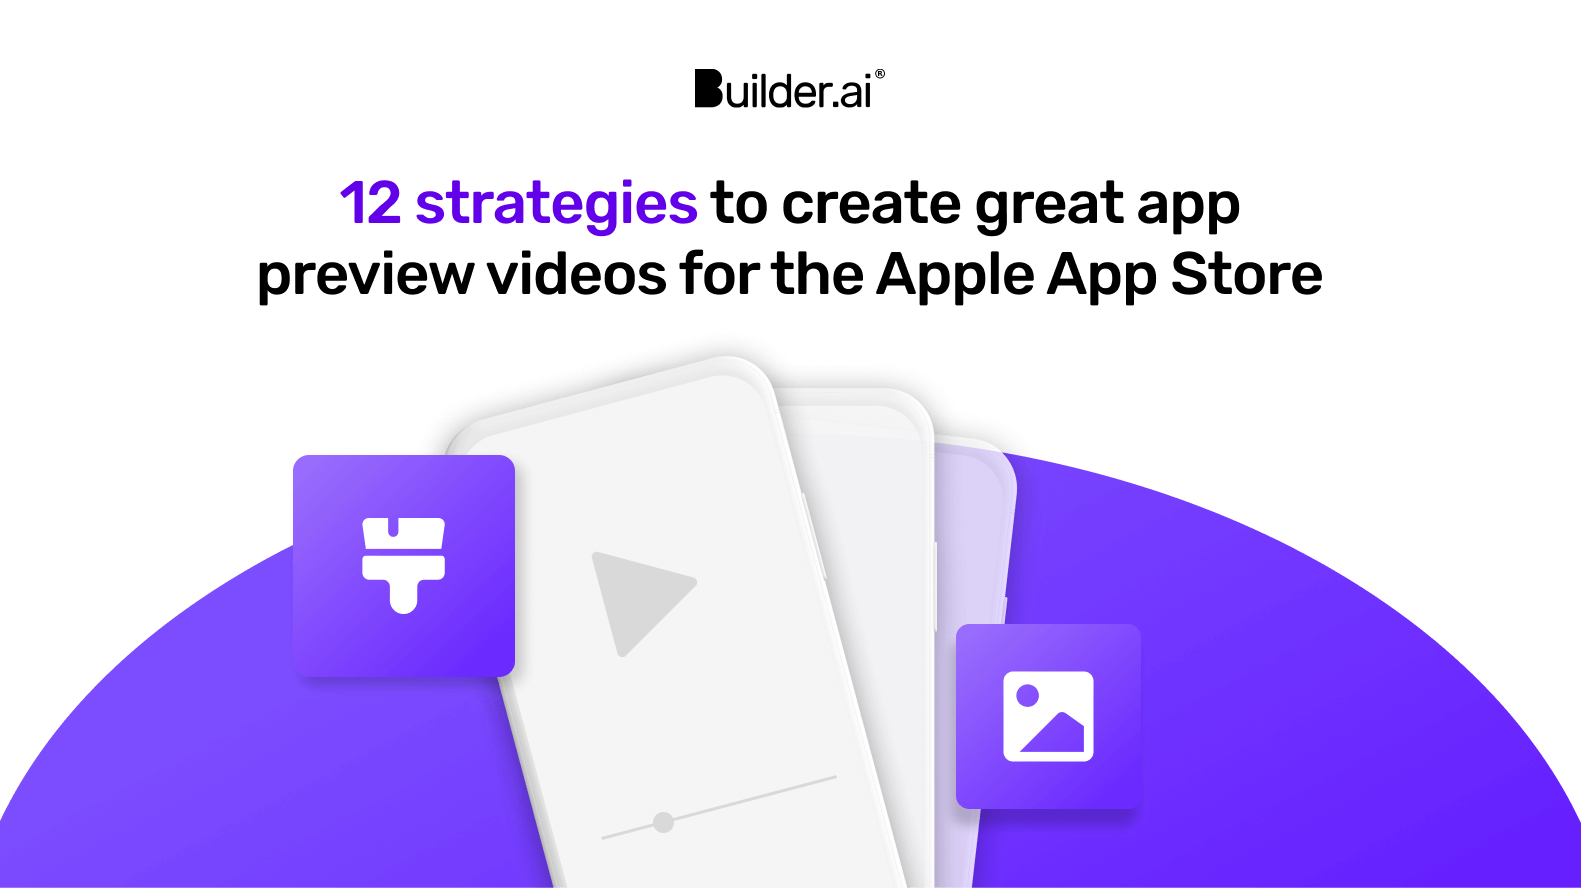 12 strategies to create great app preview videos for the Apple App Store